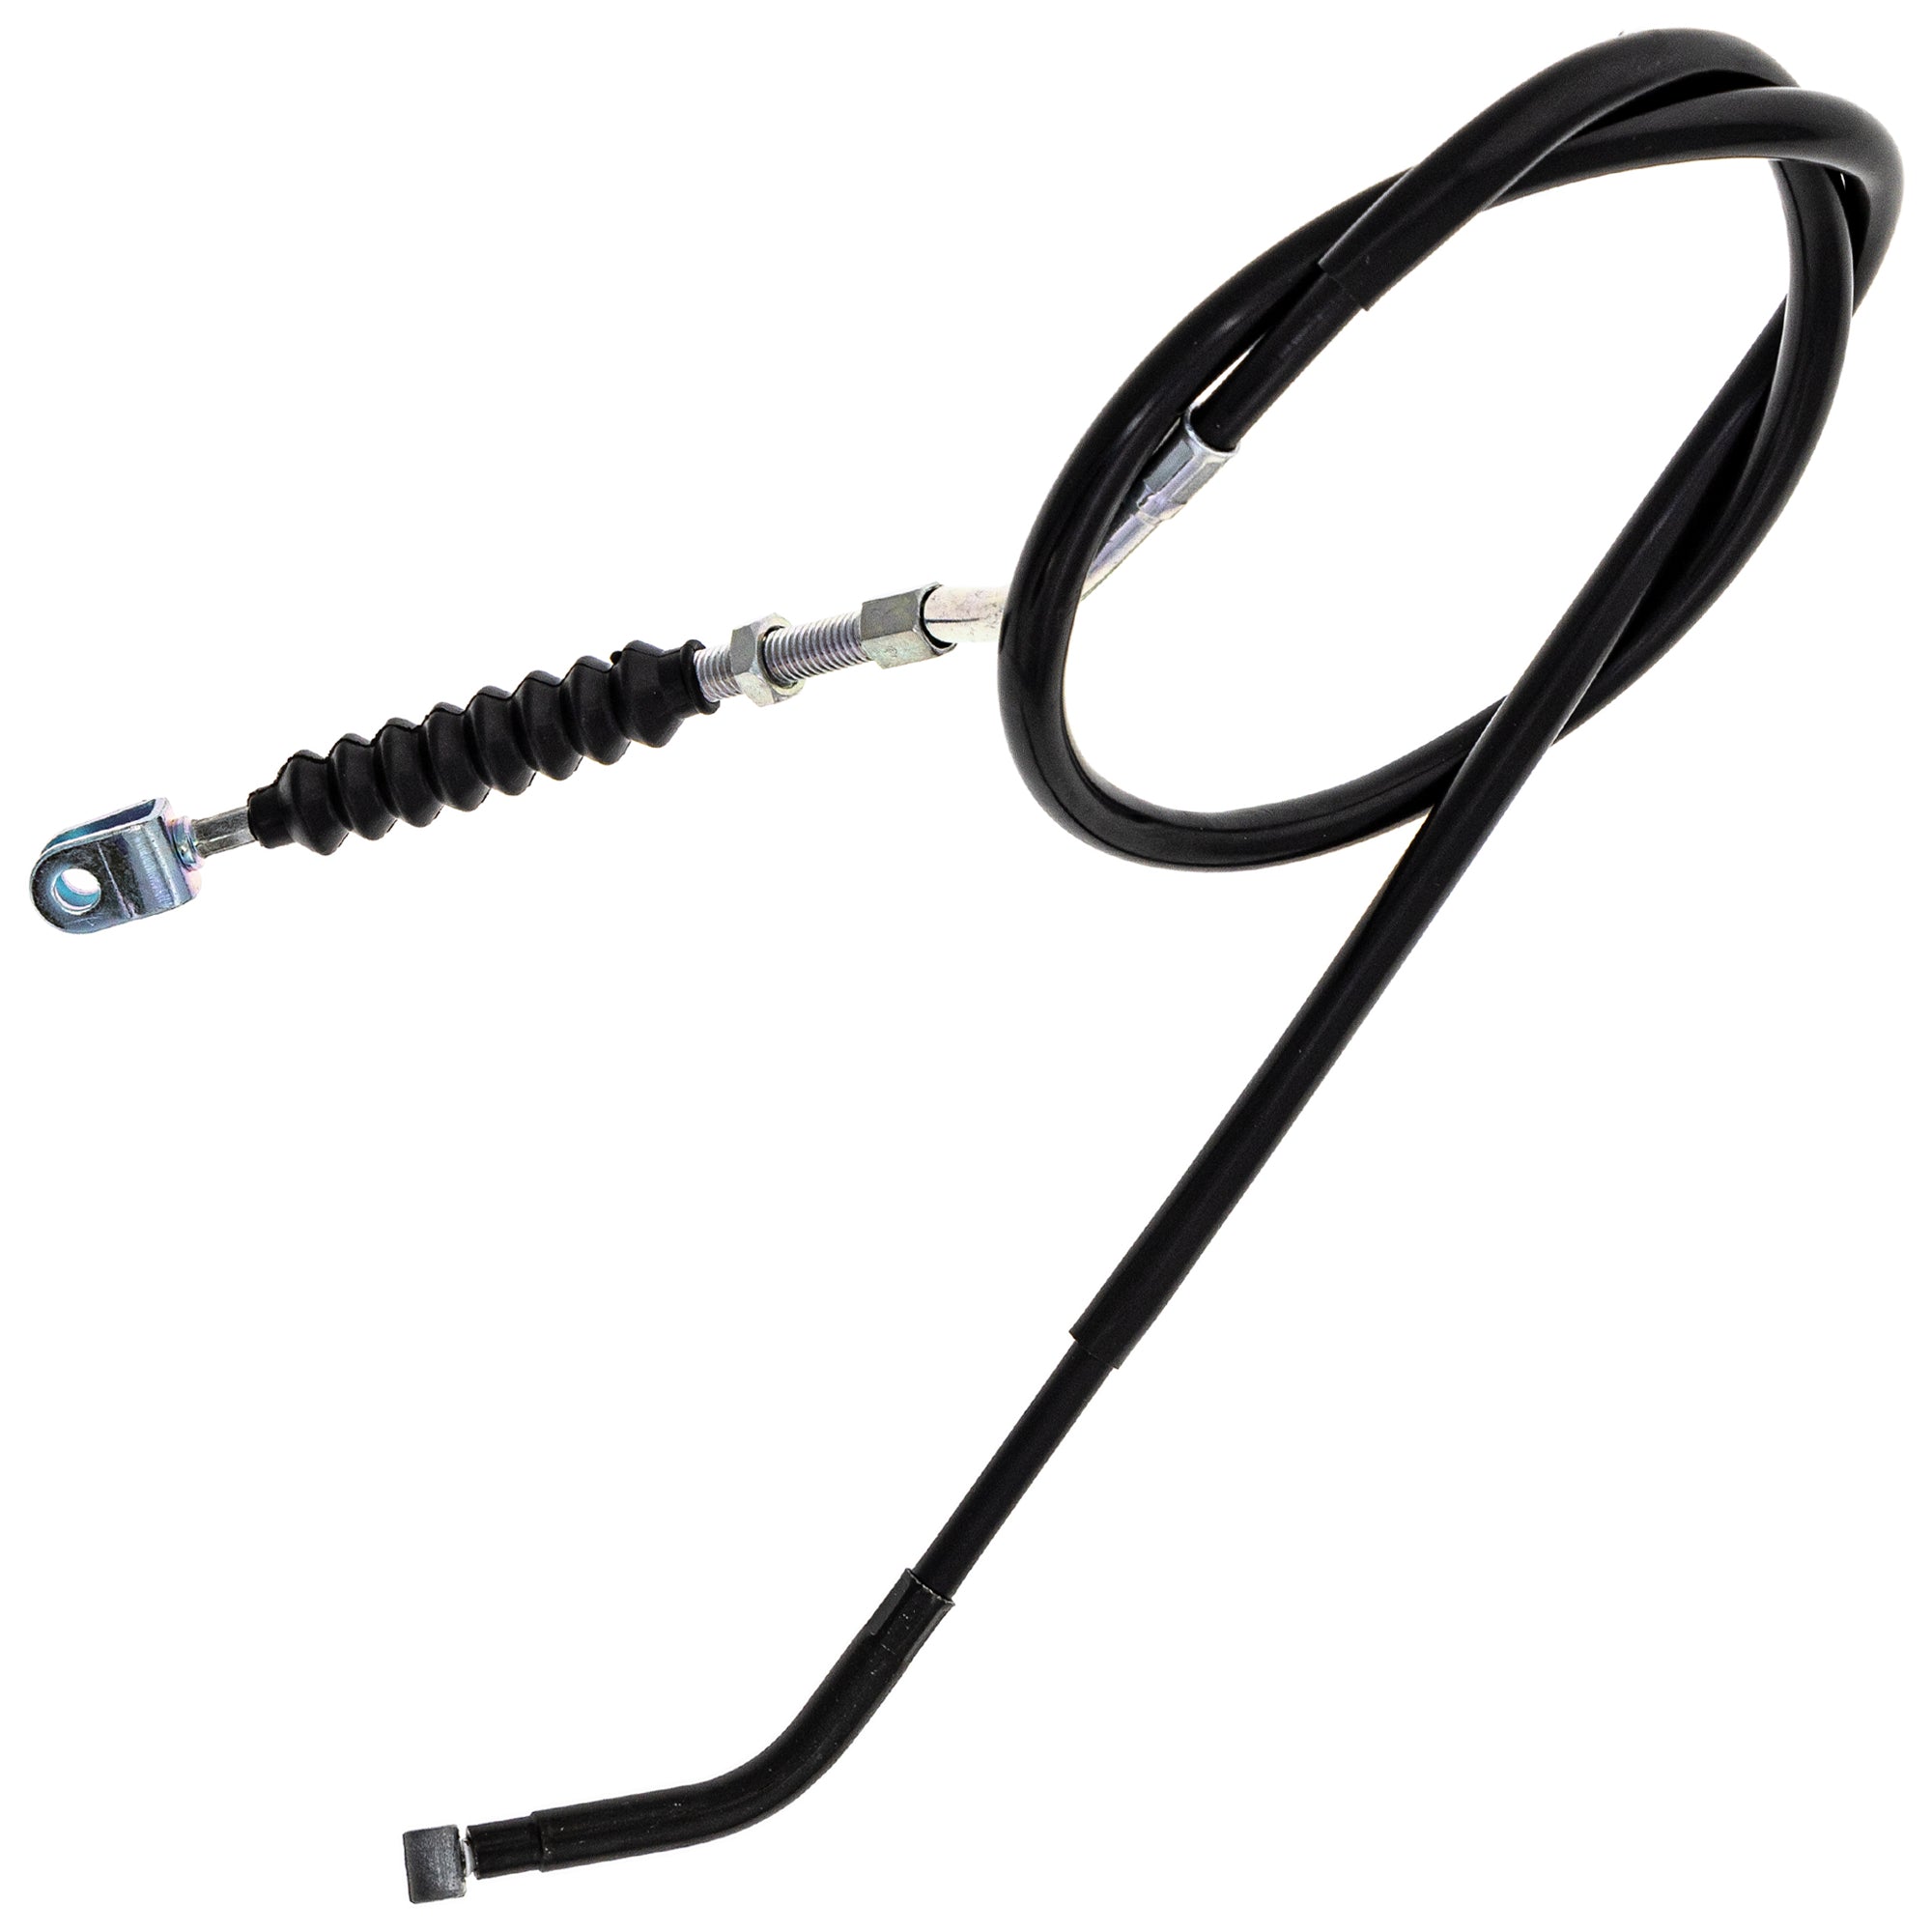 Clutch Cable for Suzuki GSXR600W 58200-17E00 Motorcycle